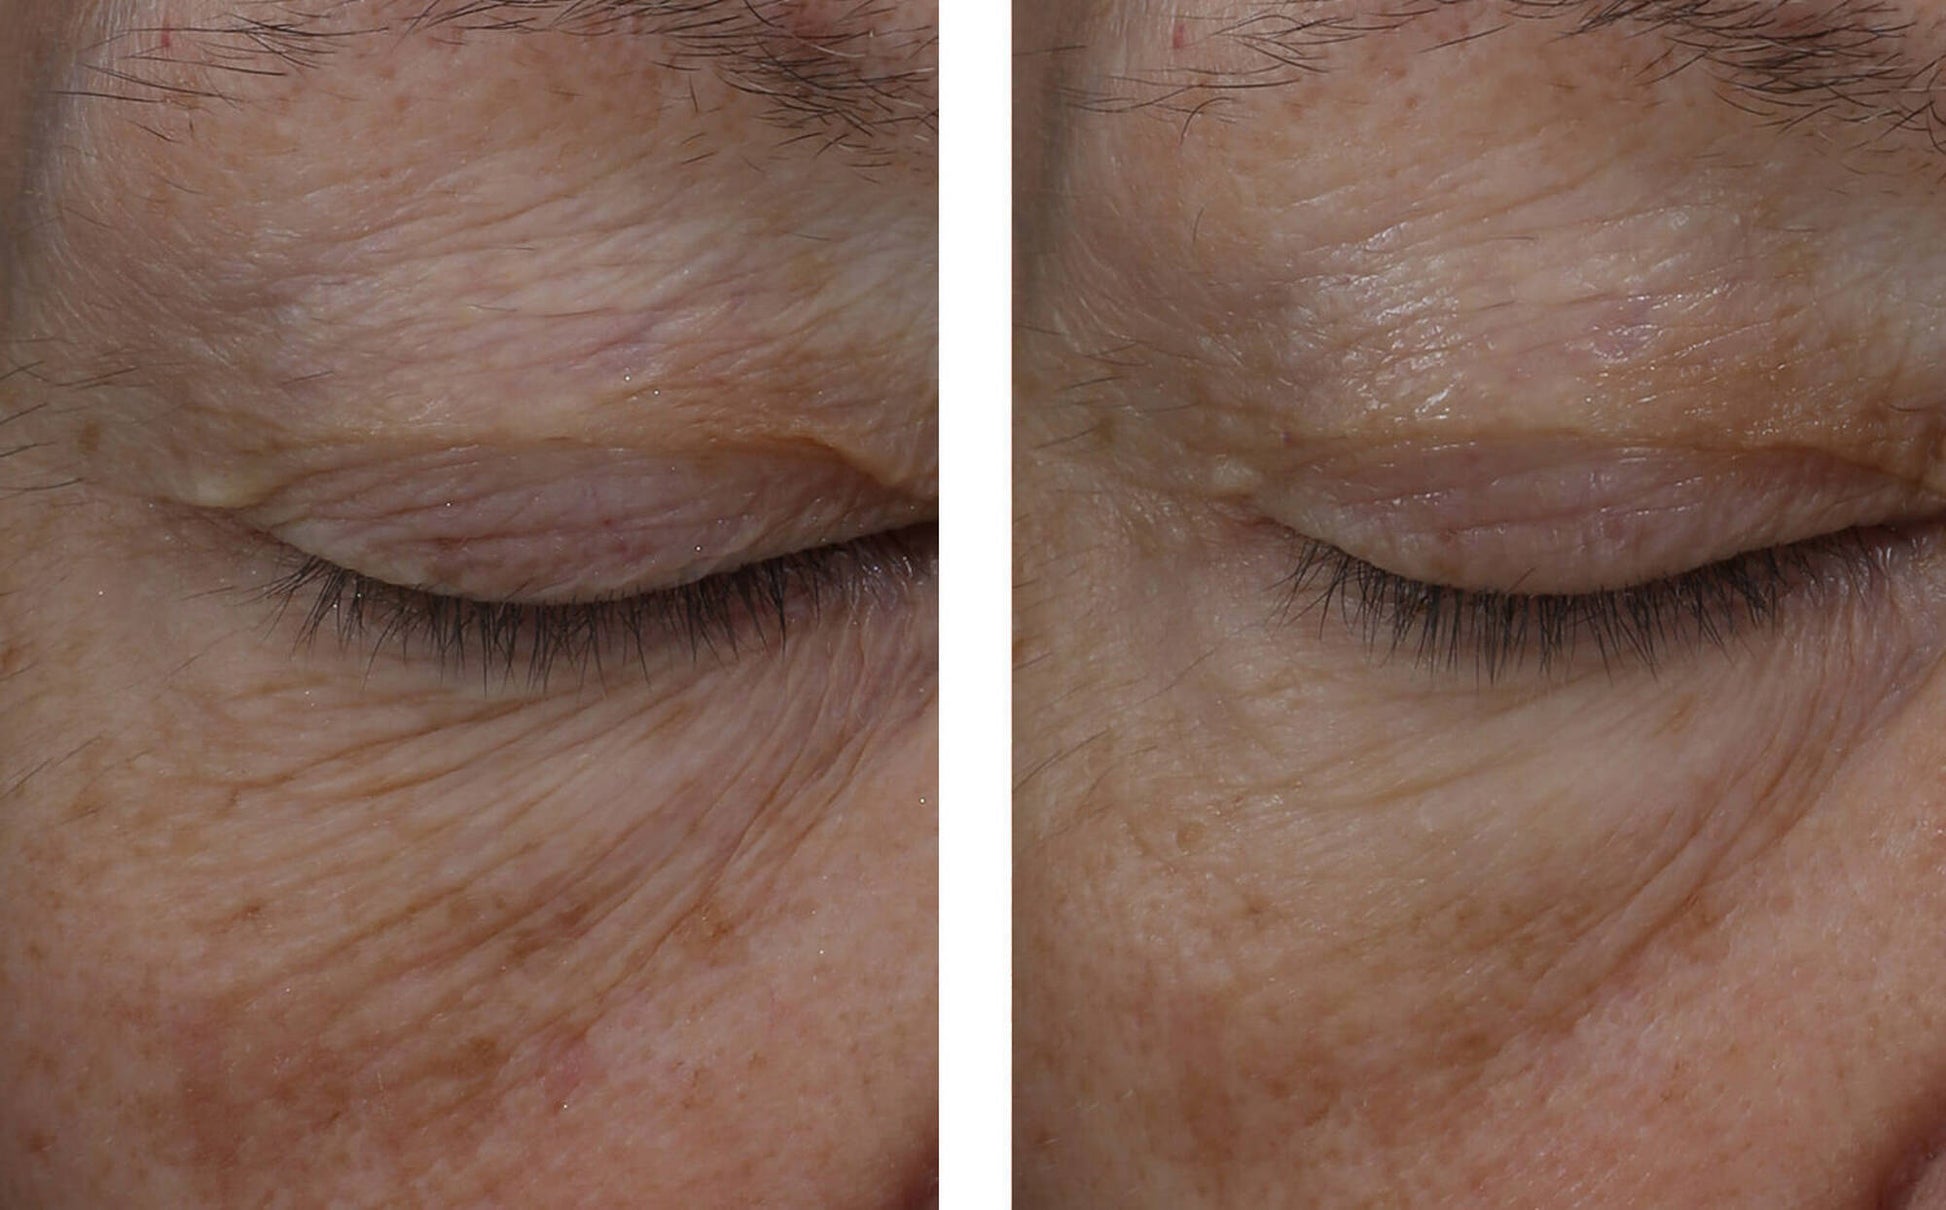 skinbetter interfuse eye cream before and after